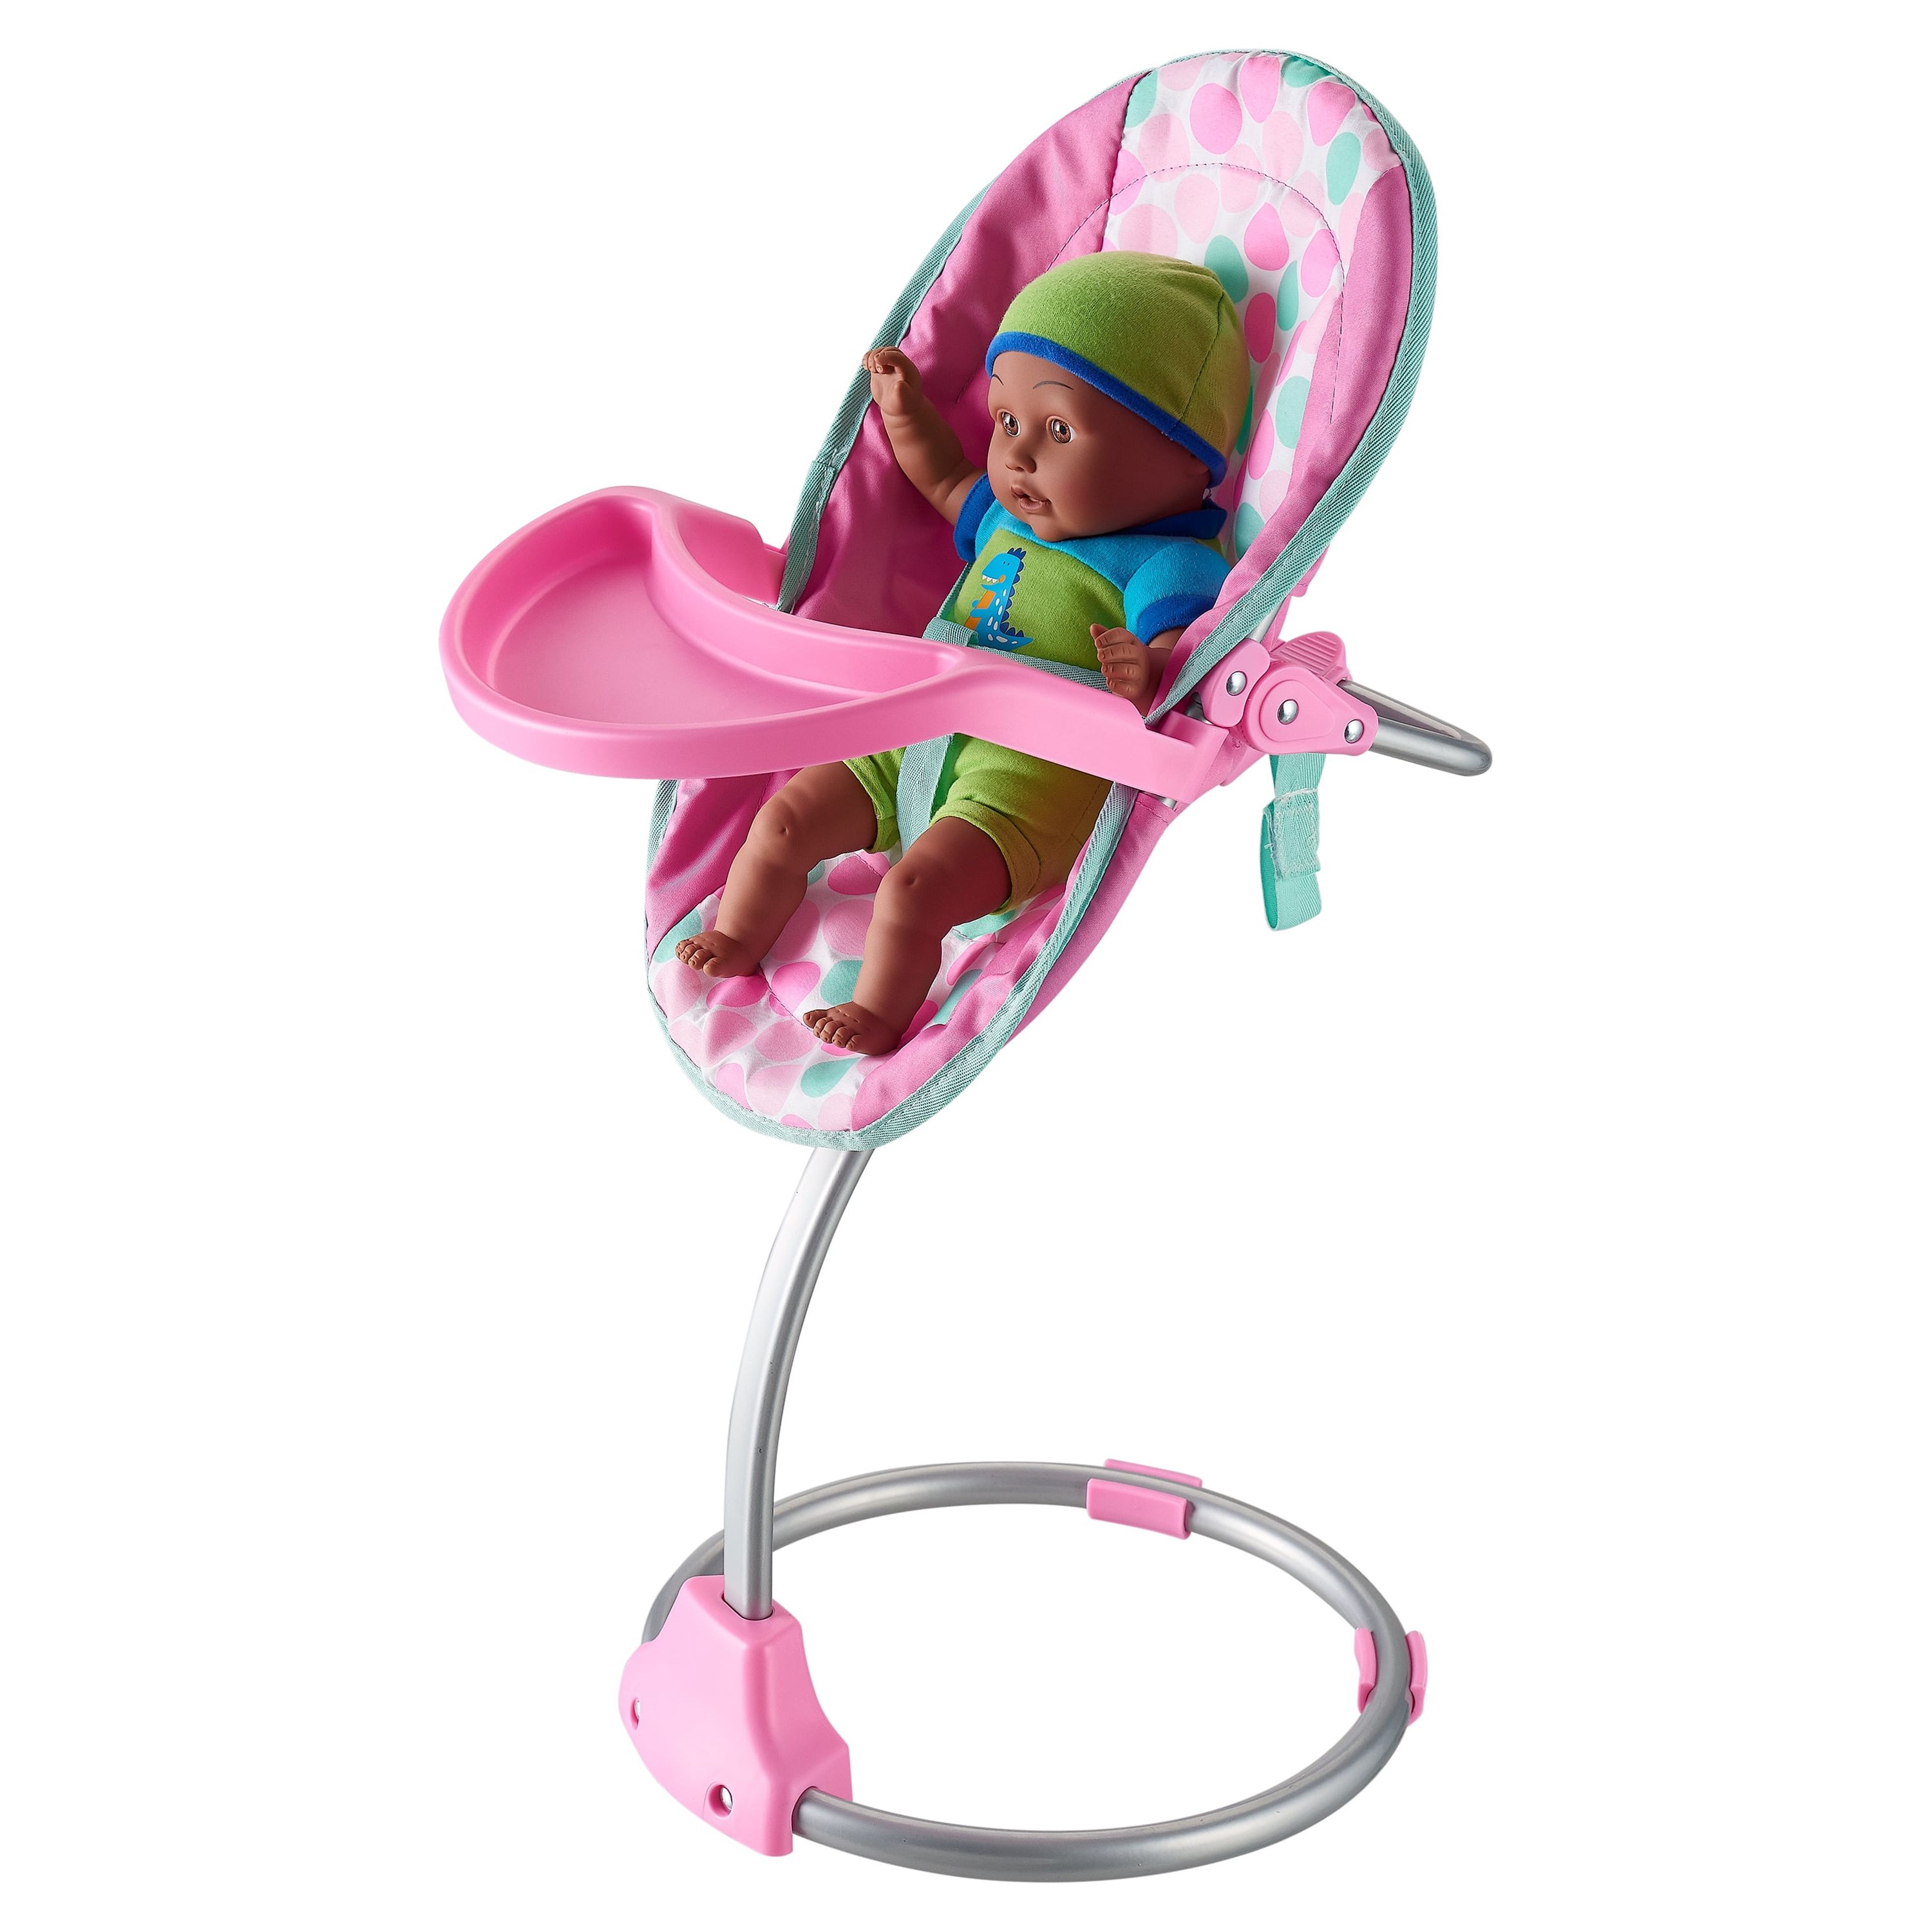 My Sweet Love 3-in-1 High Chair for 18" Dolls - image 2 of 10